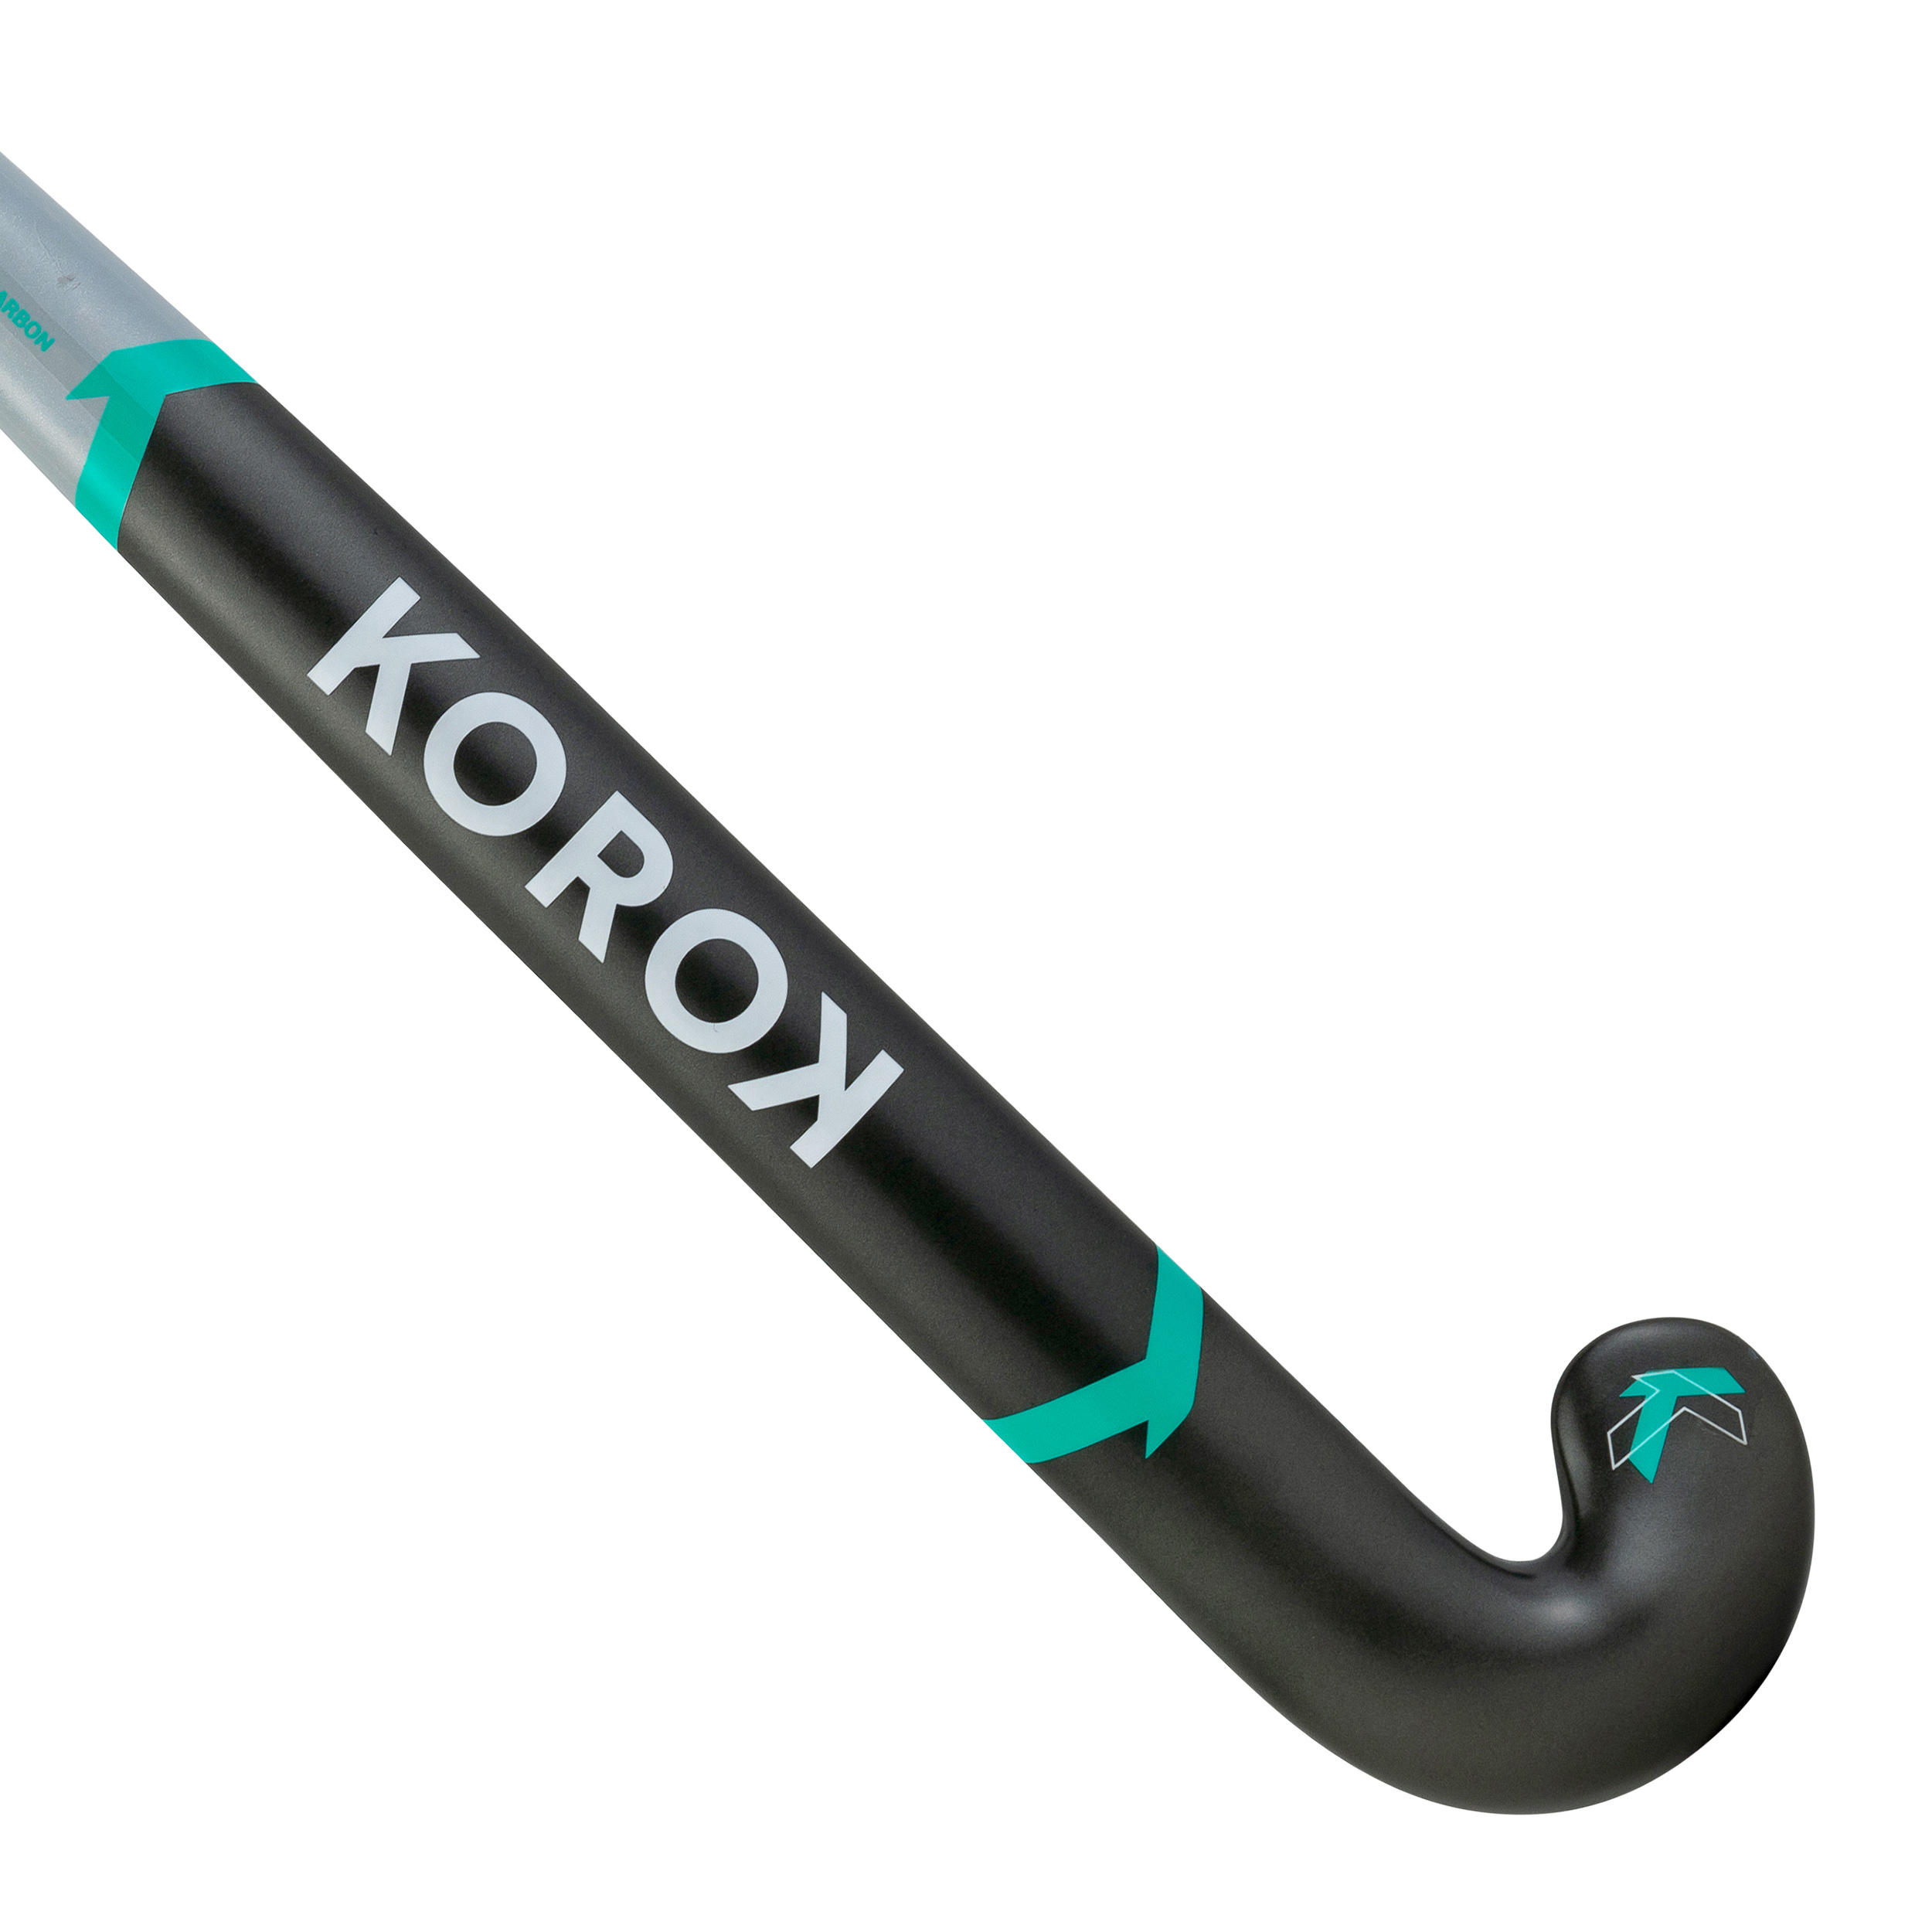 Adult Intermediate 30% Carbon Mid Bow Field Hockey Stick FH530 - Grey/Turquoise 8/12